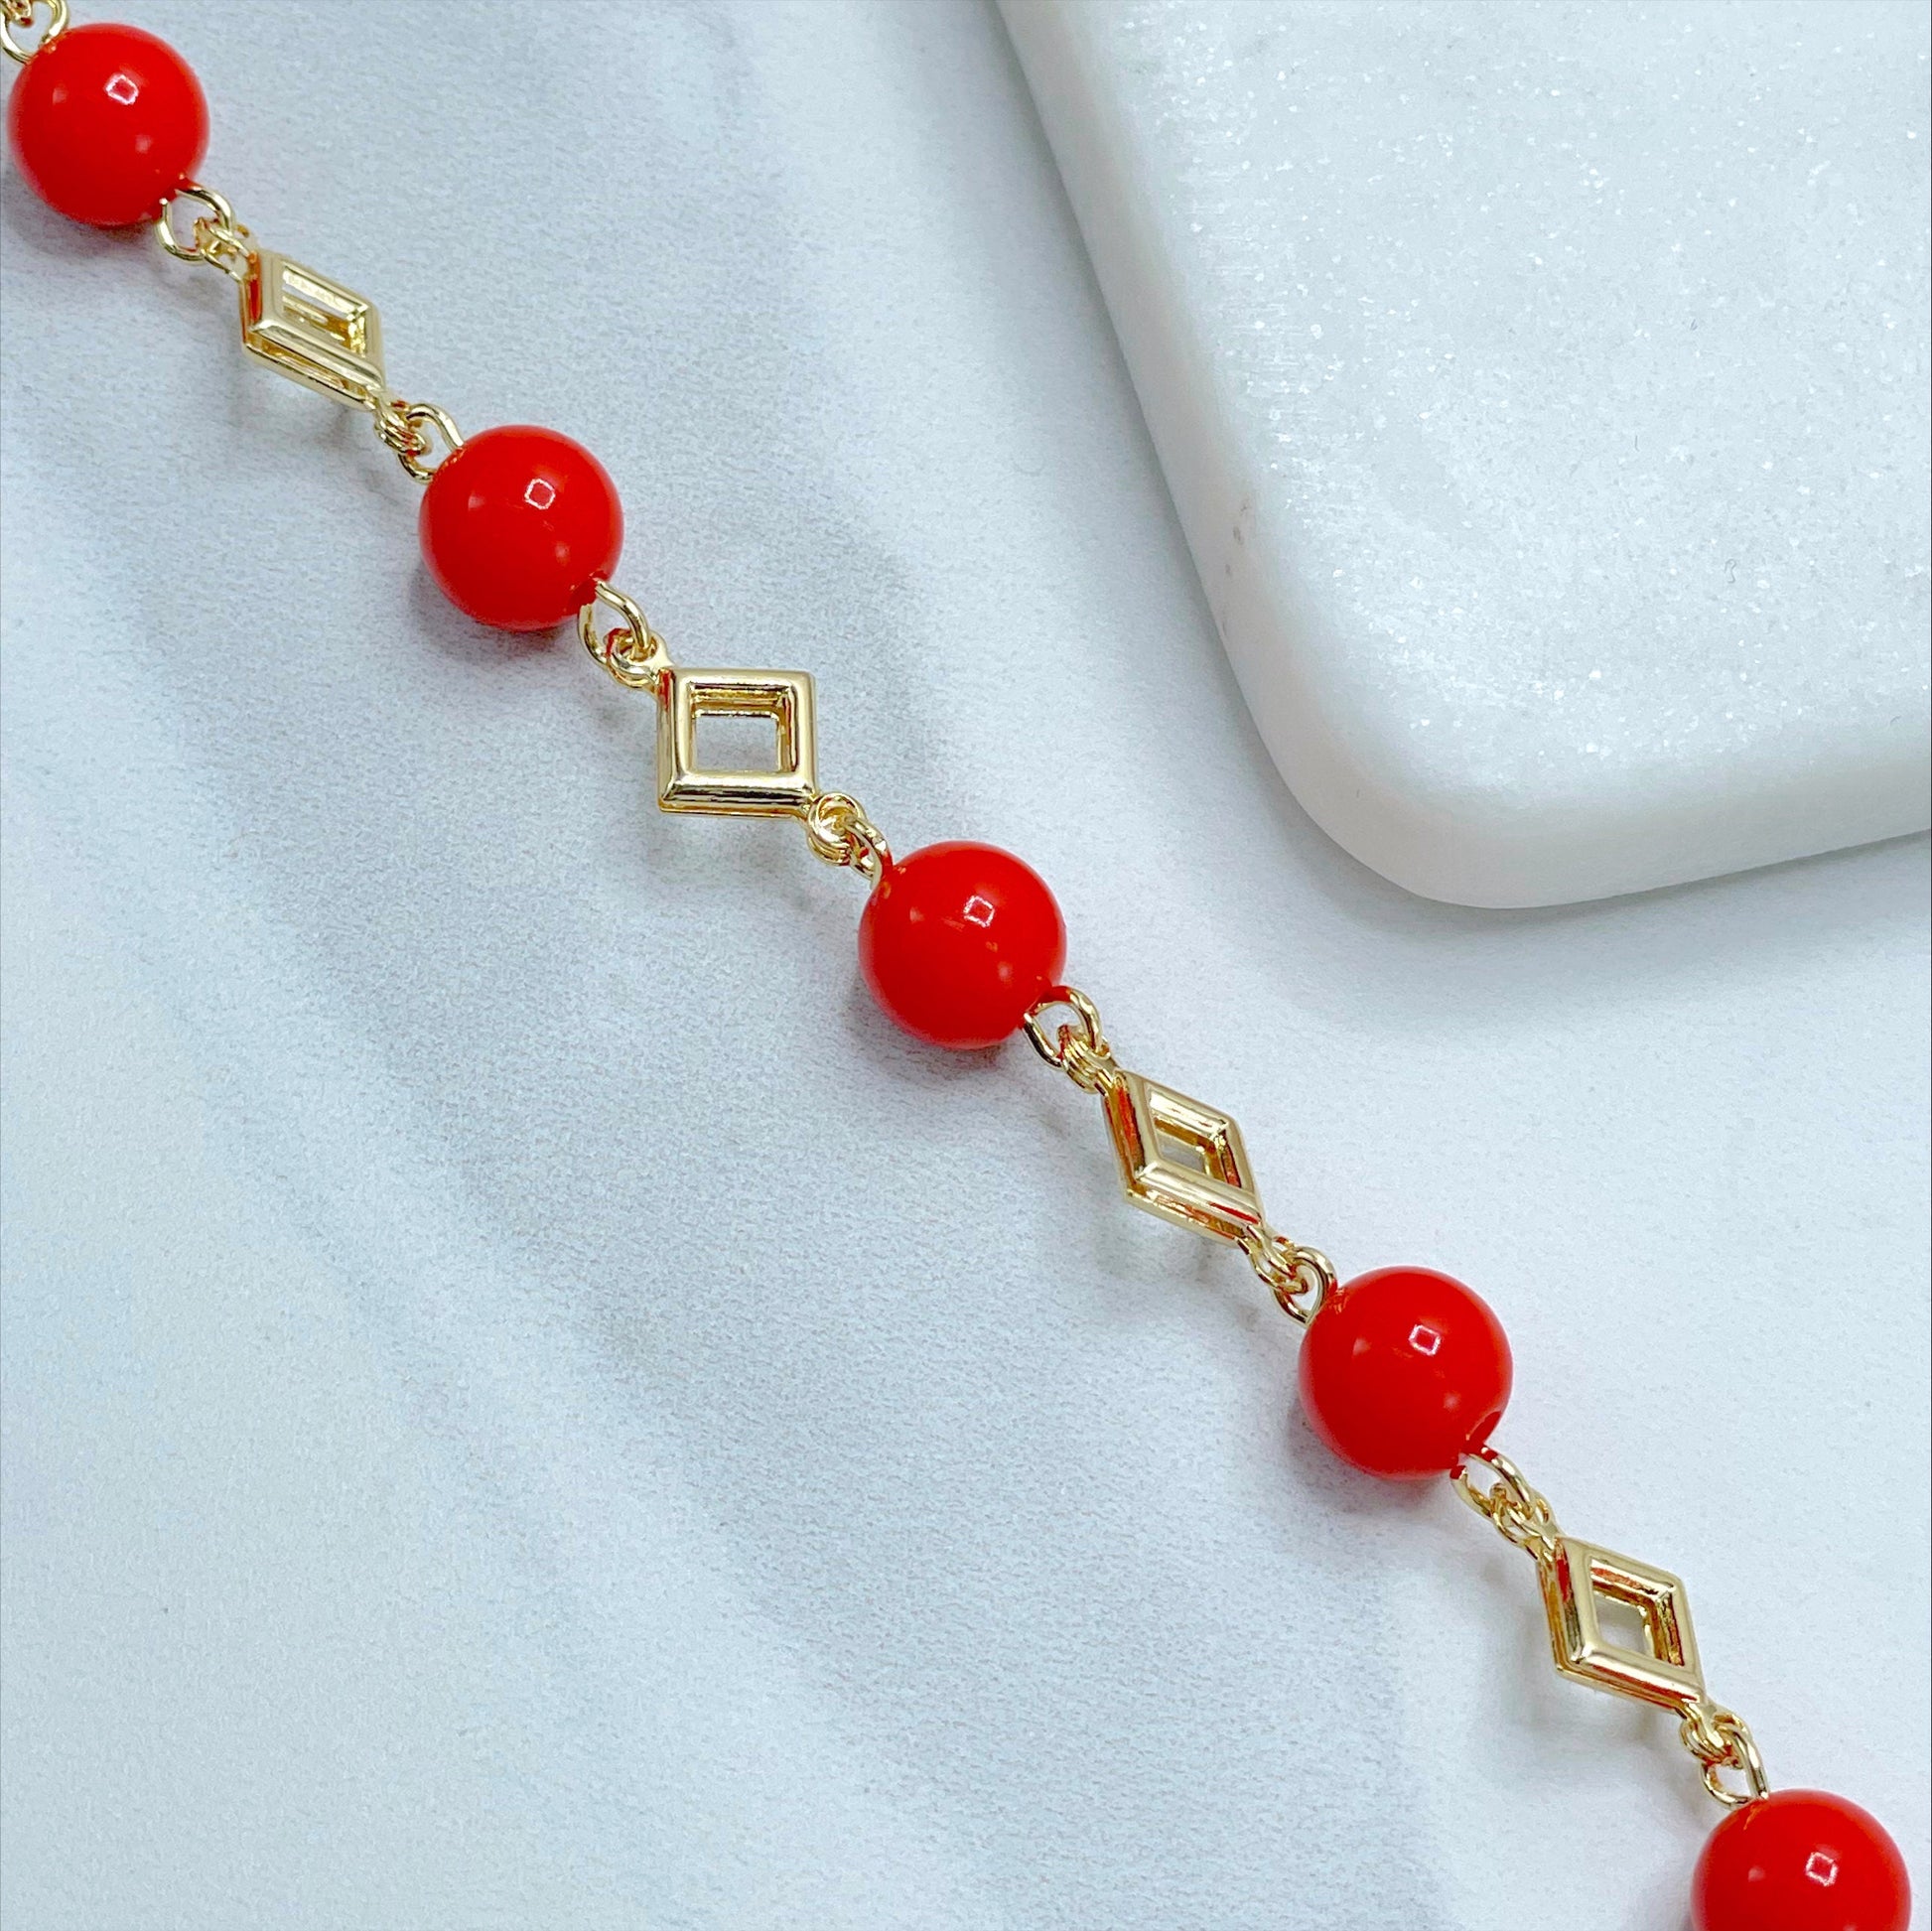 18k Gold Filled 8mm Triangle, Orange Beads Balls, Bracelet or Earrings as a Set Wholesale Jewelry Supplies